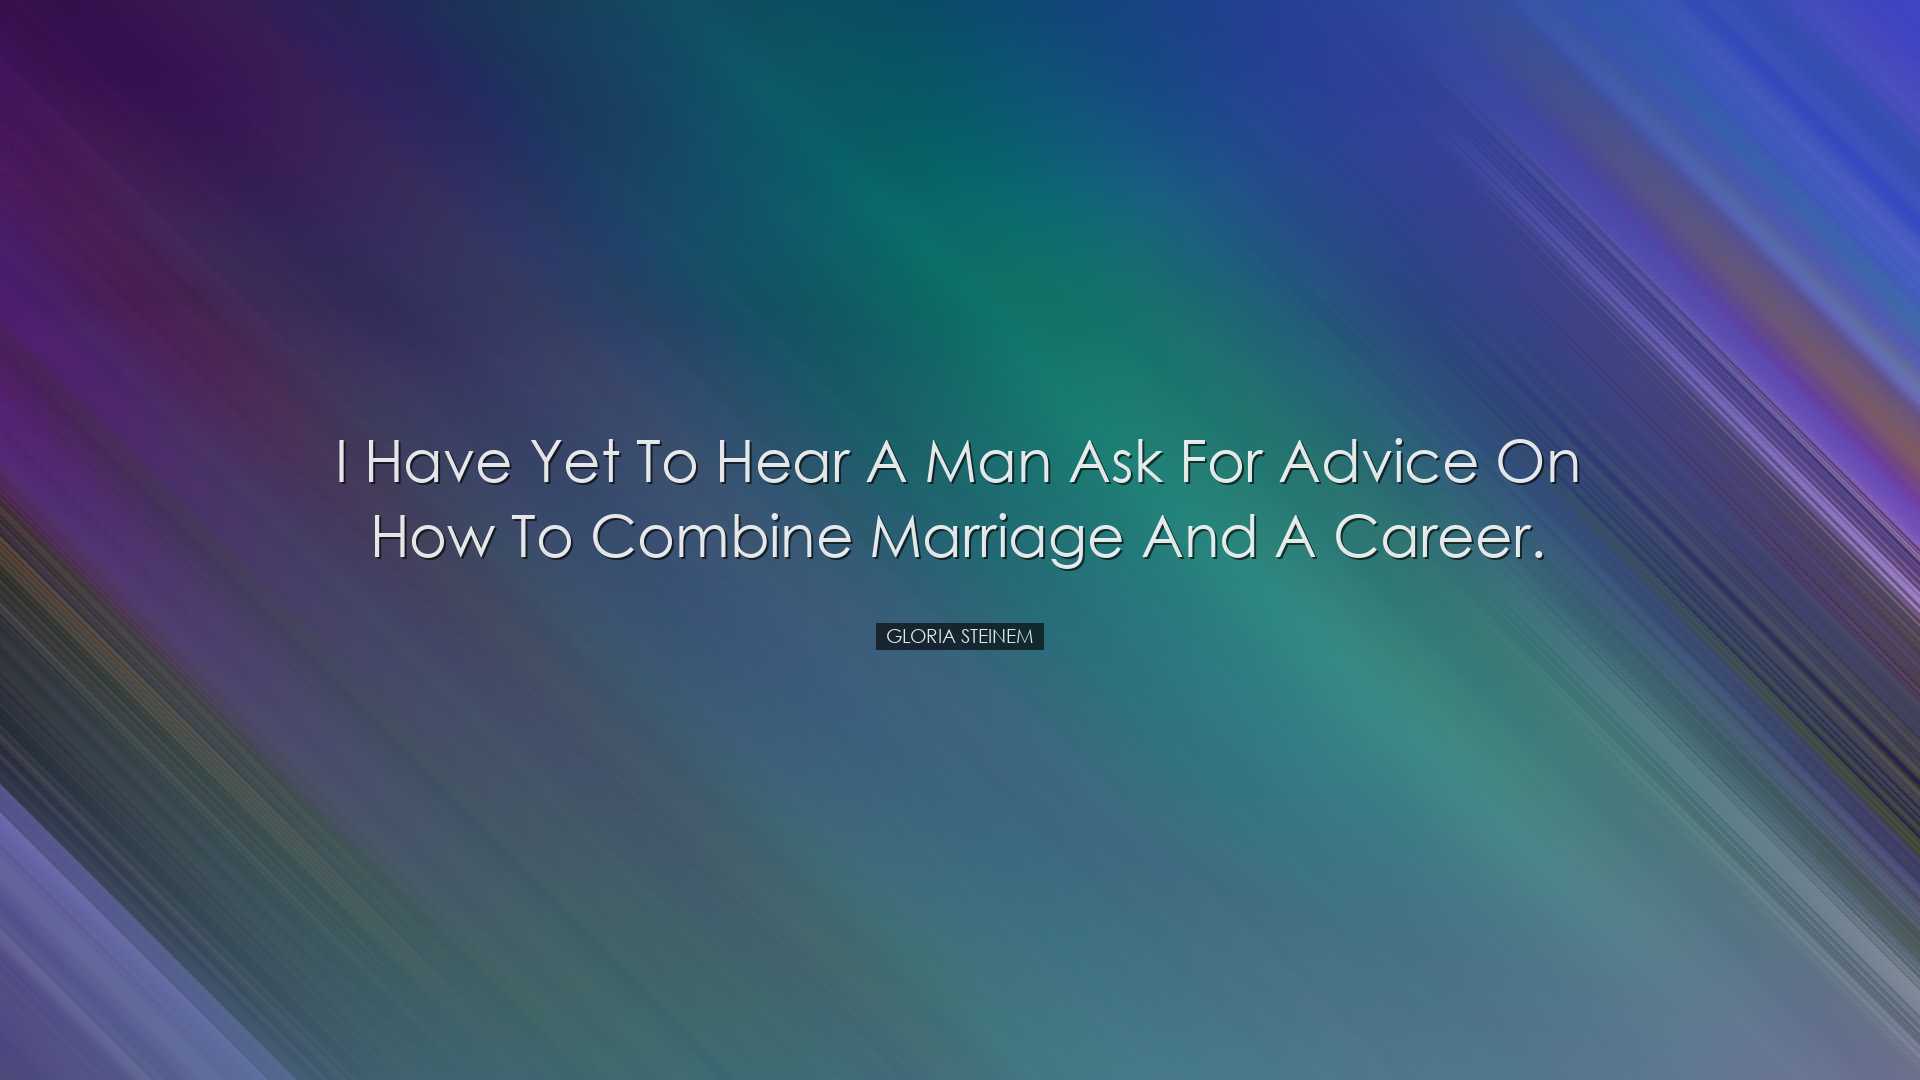 I have yet to hear a man ask for advice on how to combine marriage